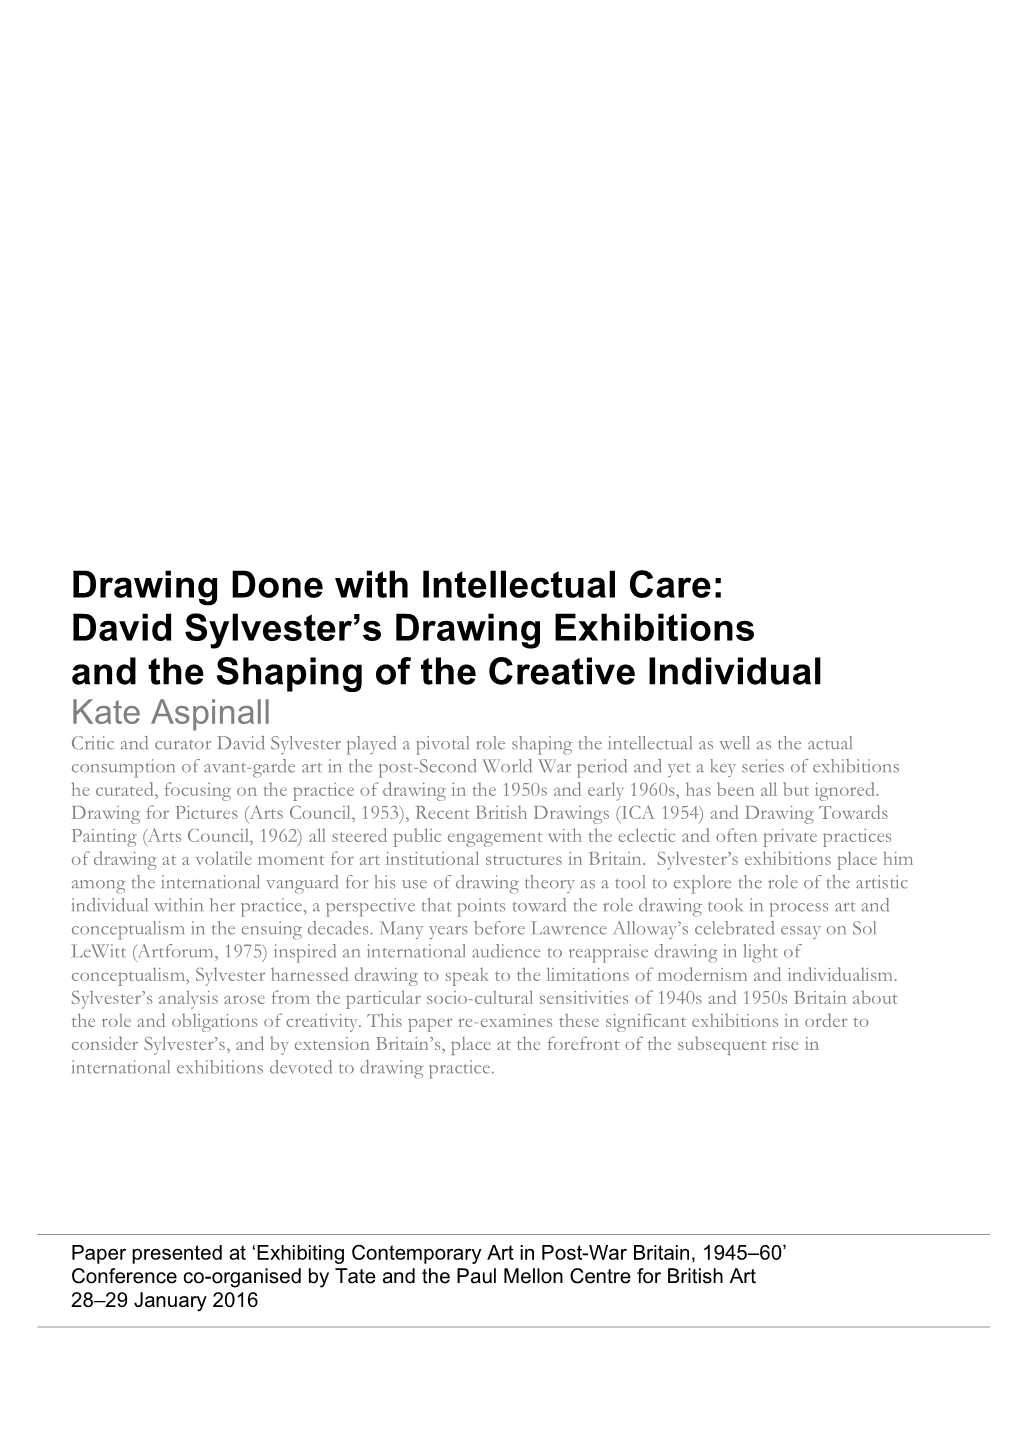 Drawing Done with Intellectual Care: David Sylvester's Drawing